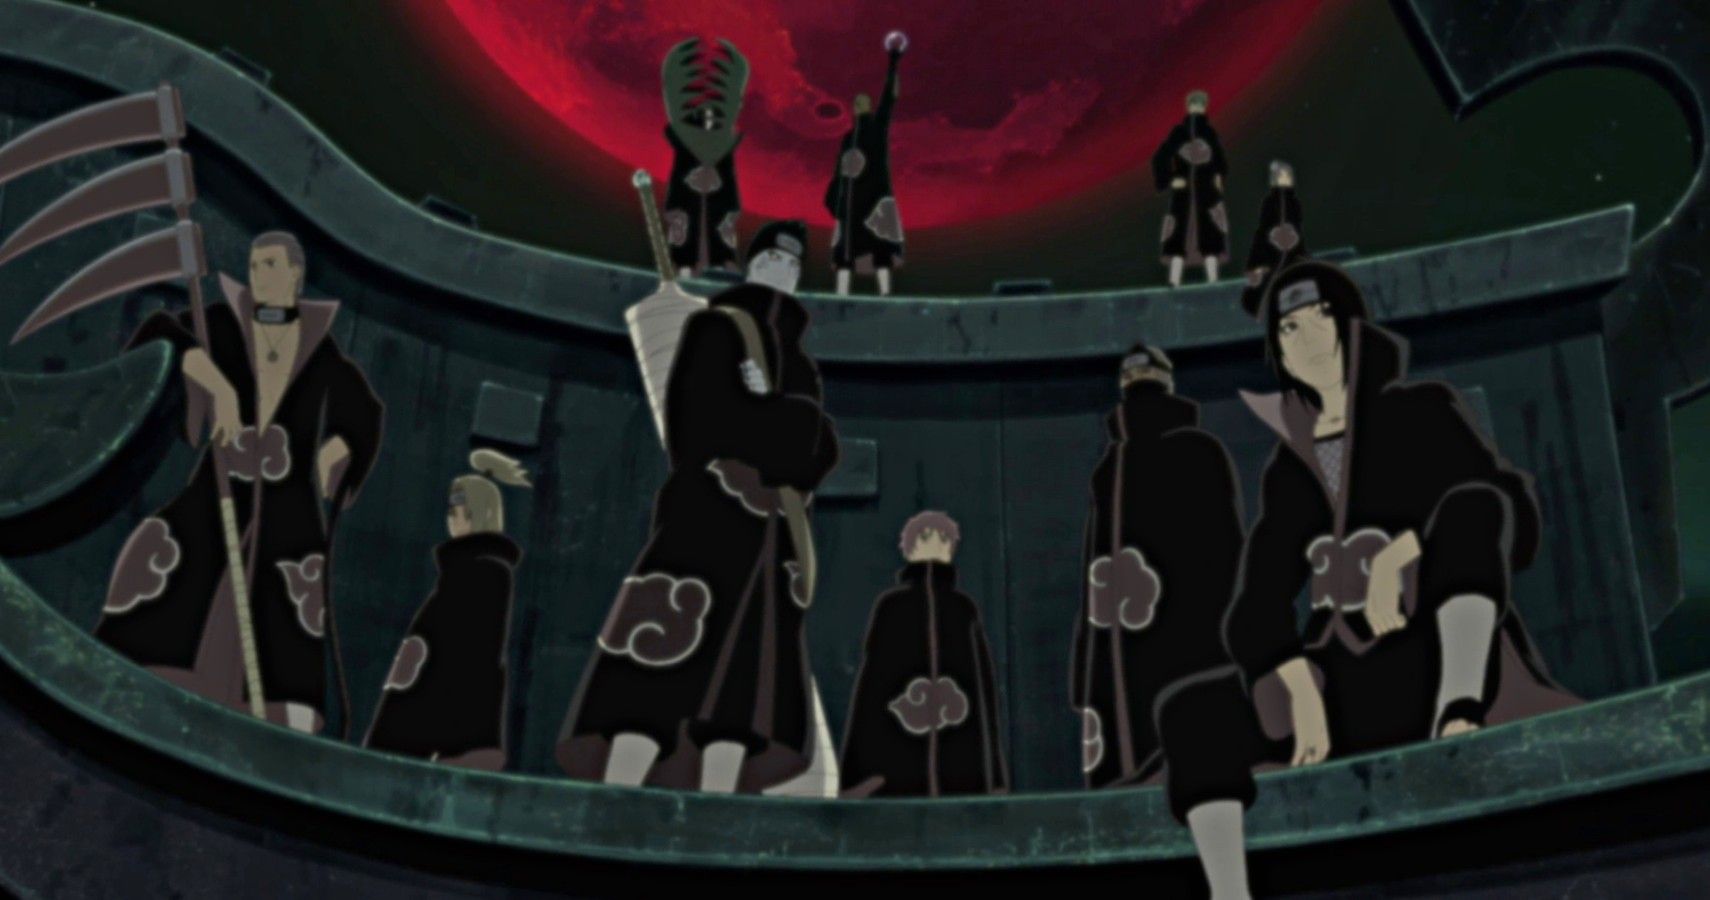 Naruto: 10 Characters Who Can Solo The Entire Akatsuki